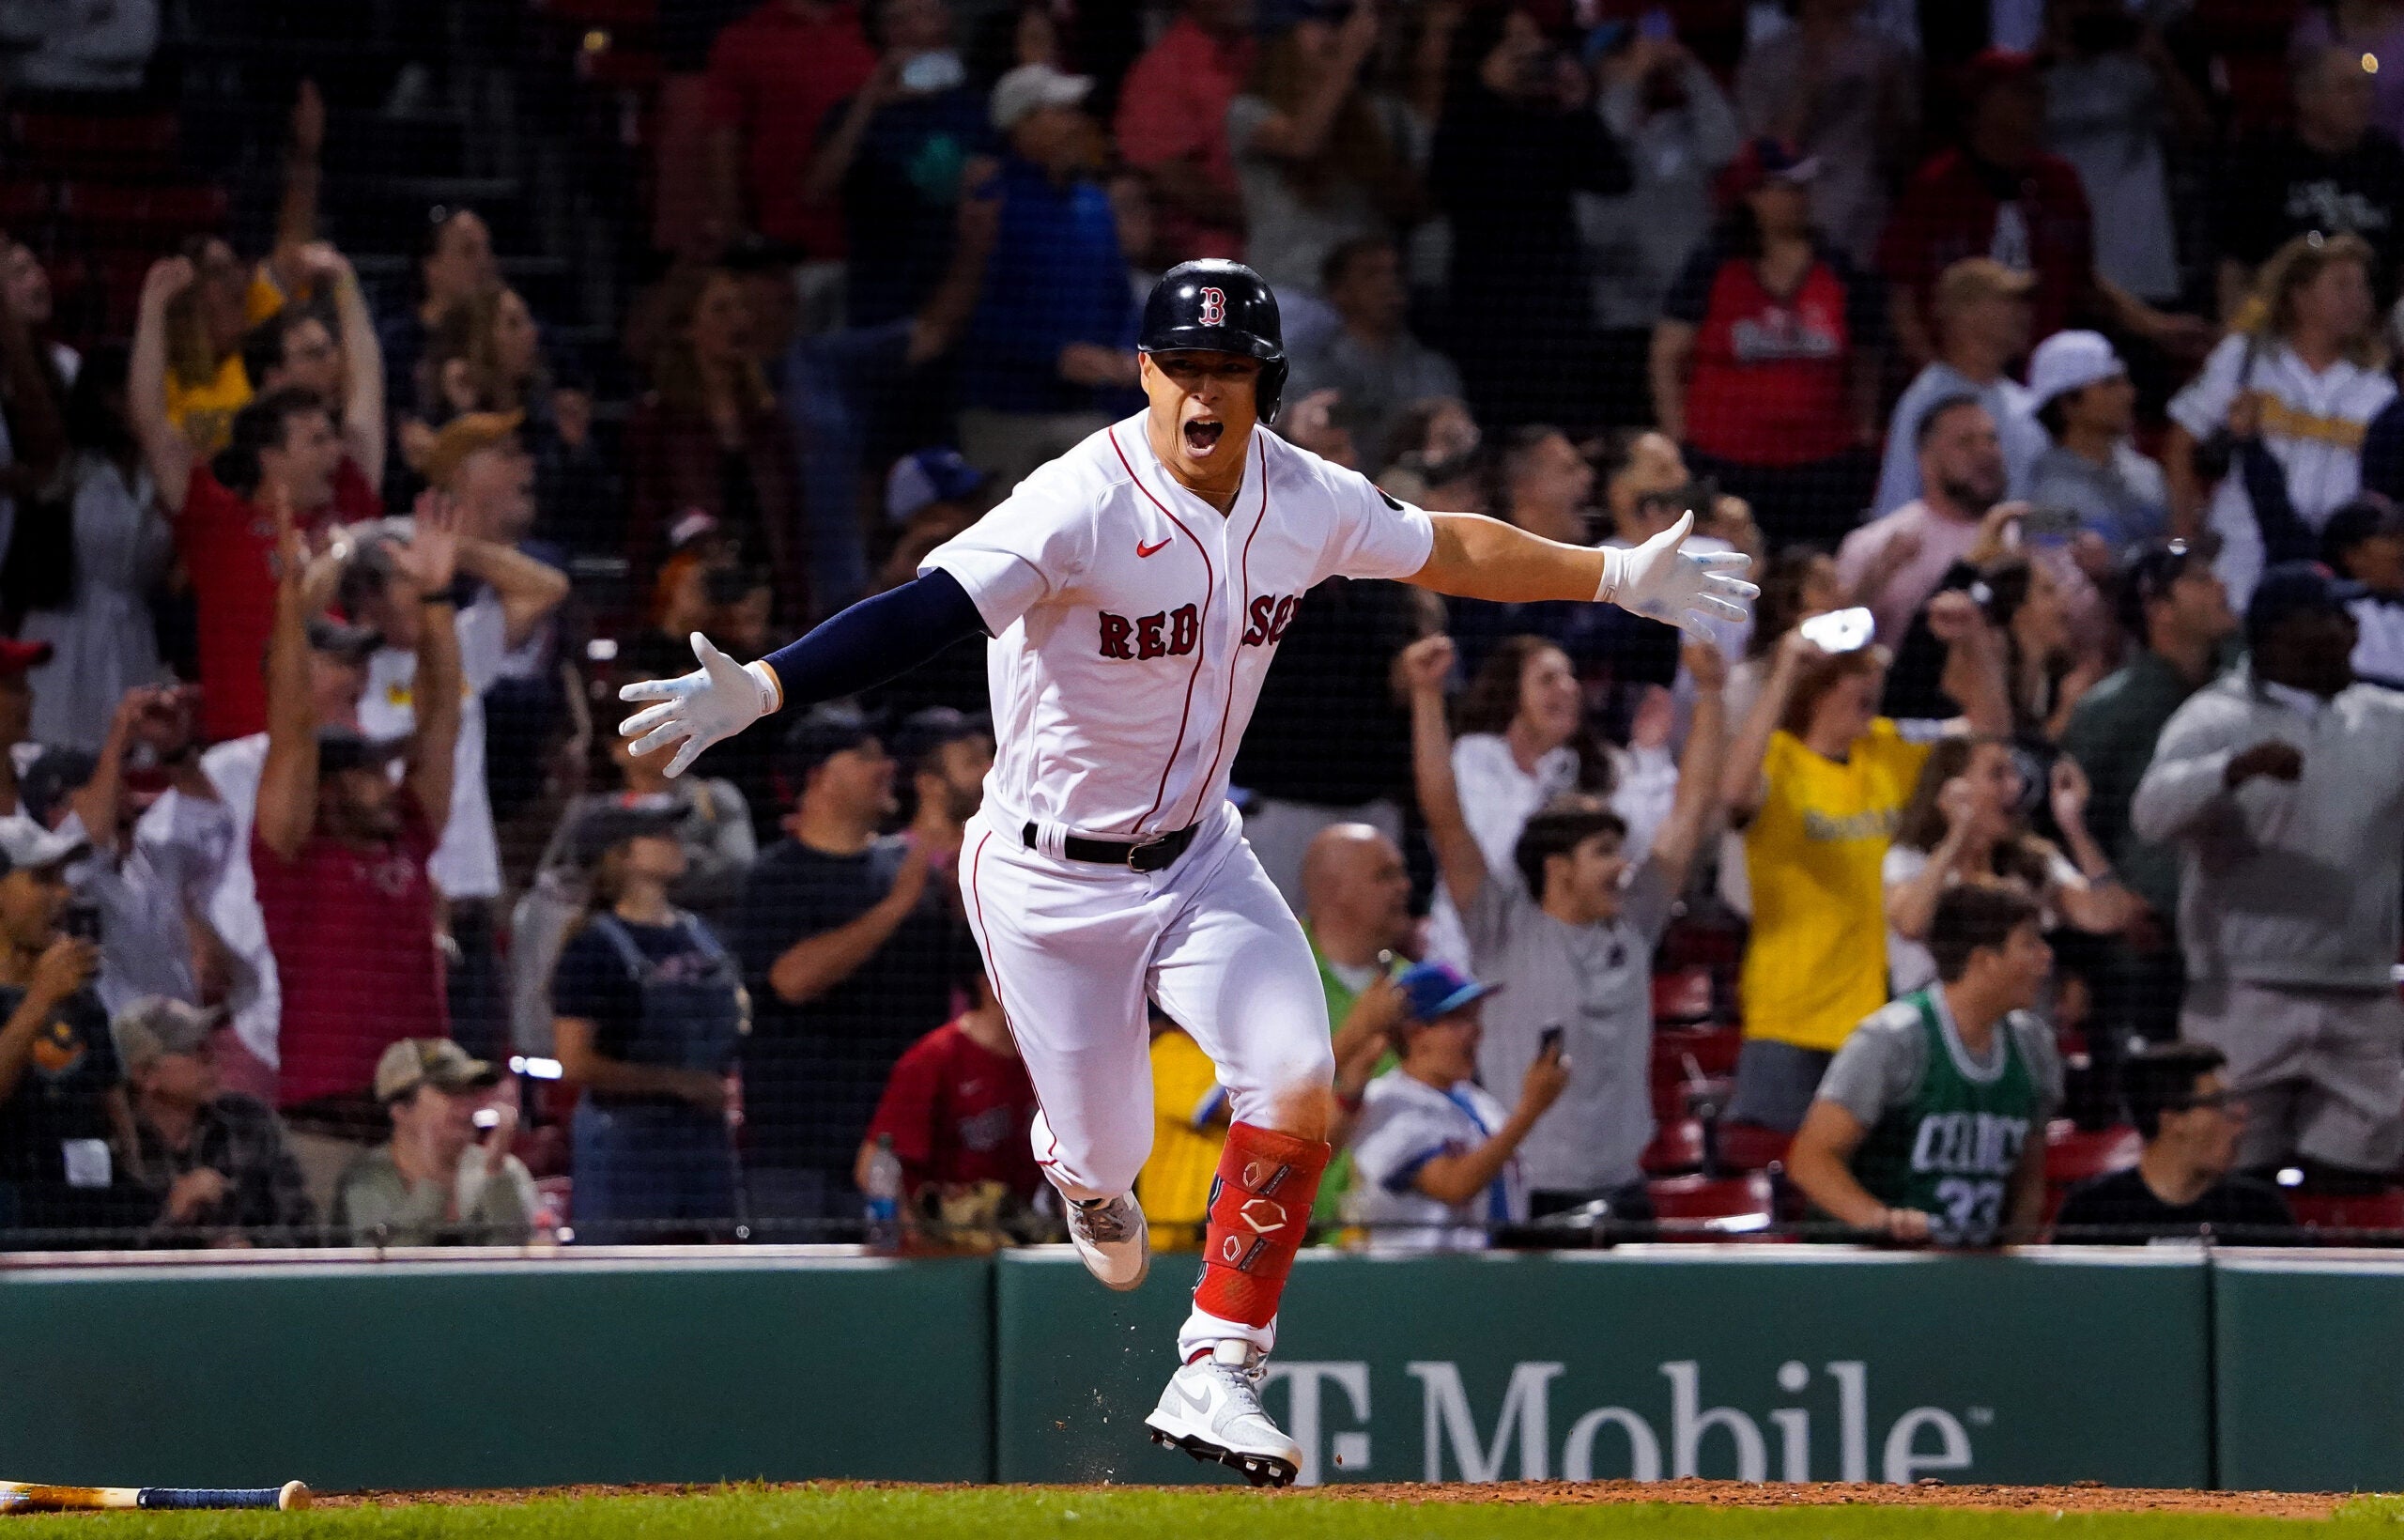 Rob Refsnyder, with his arms outstretched and the crowd beginning to rise behind him, realizes he's delivered the game-winning hit for the Red Sox.